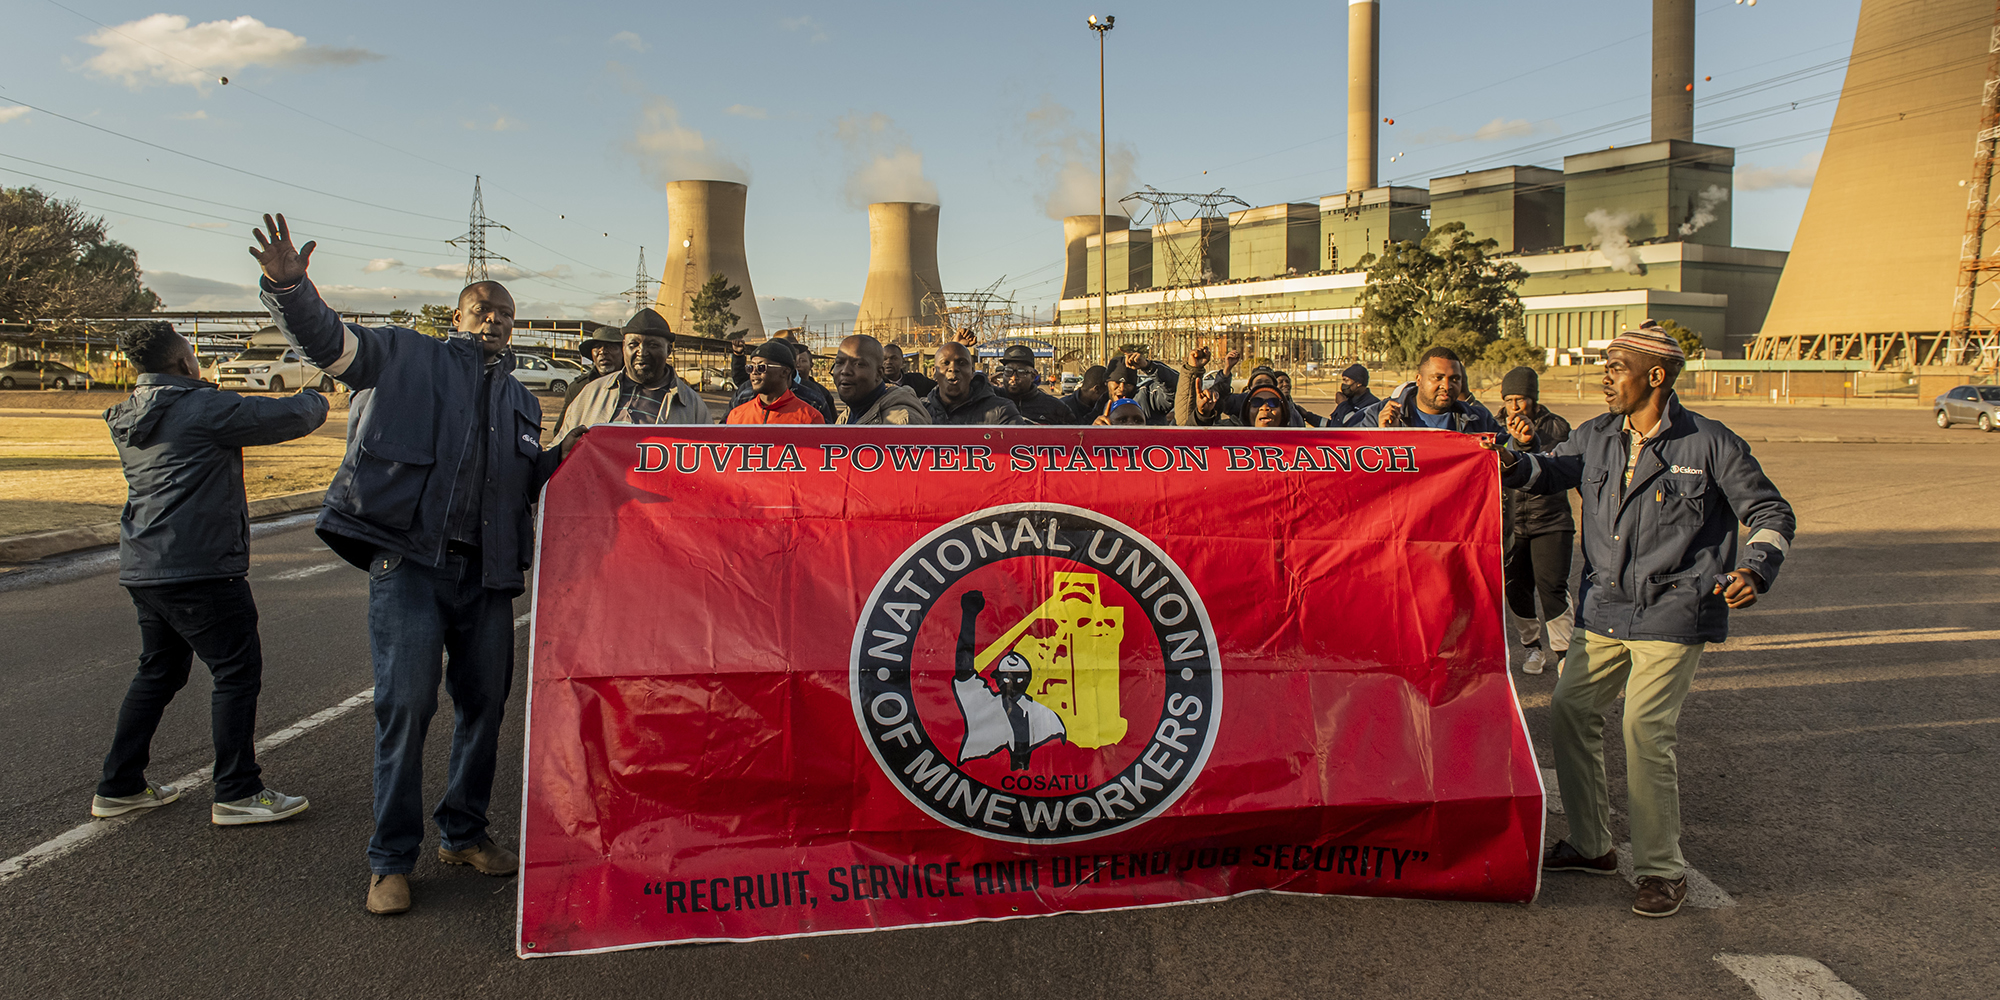 Solidarity boss slams public perception that employees at Eskom are overpaid